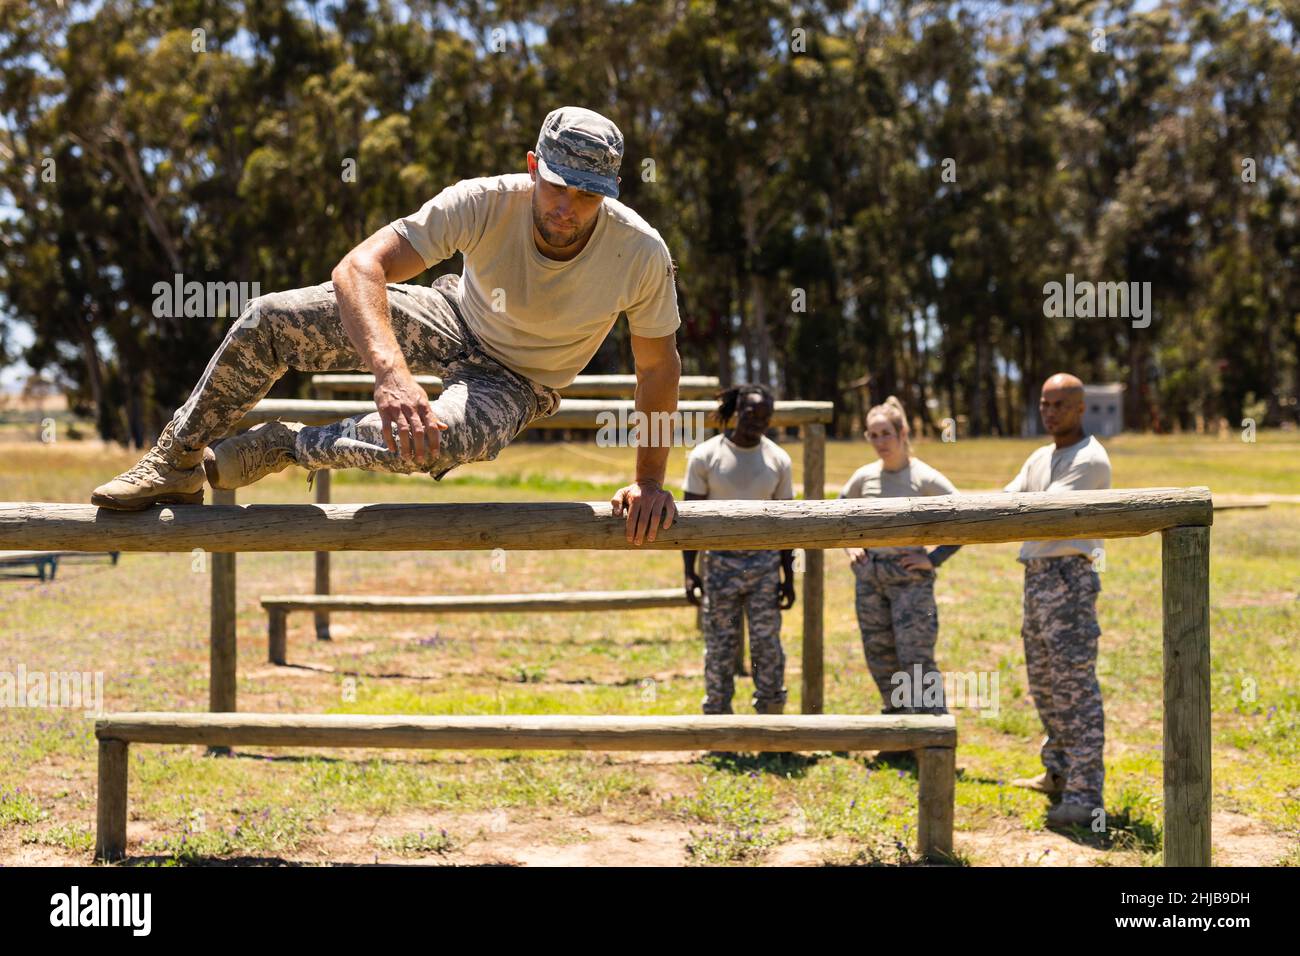 Caucasian male soldier jumping over wooden hurdles during obstacle course at boot camp Stock Photo